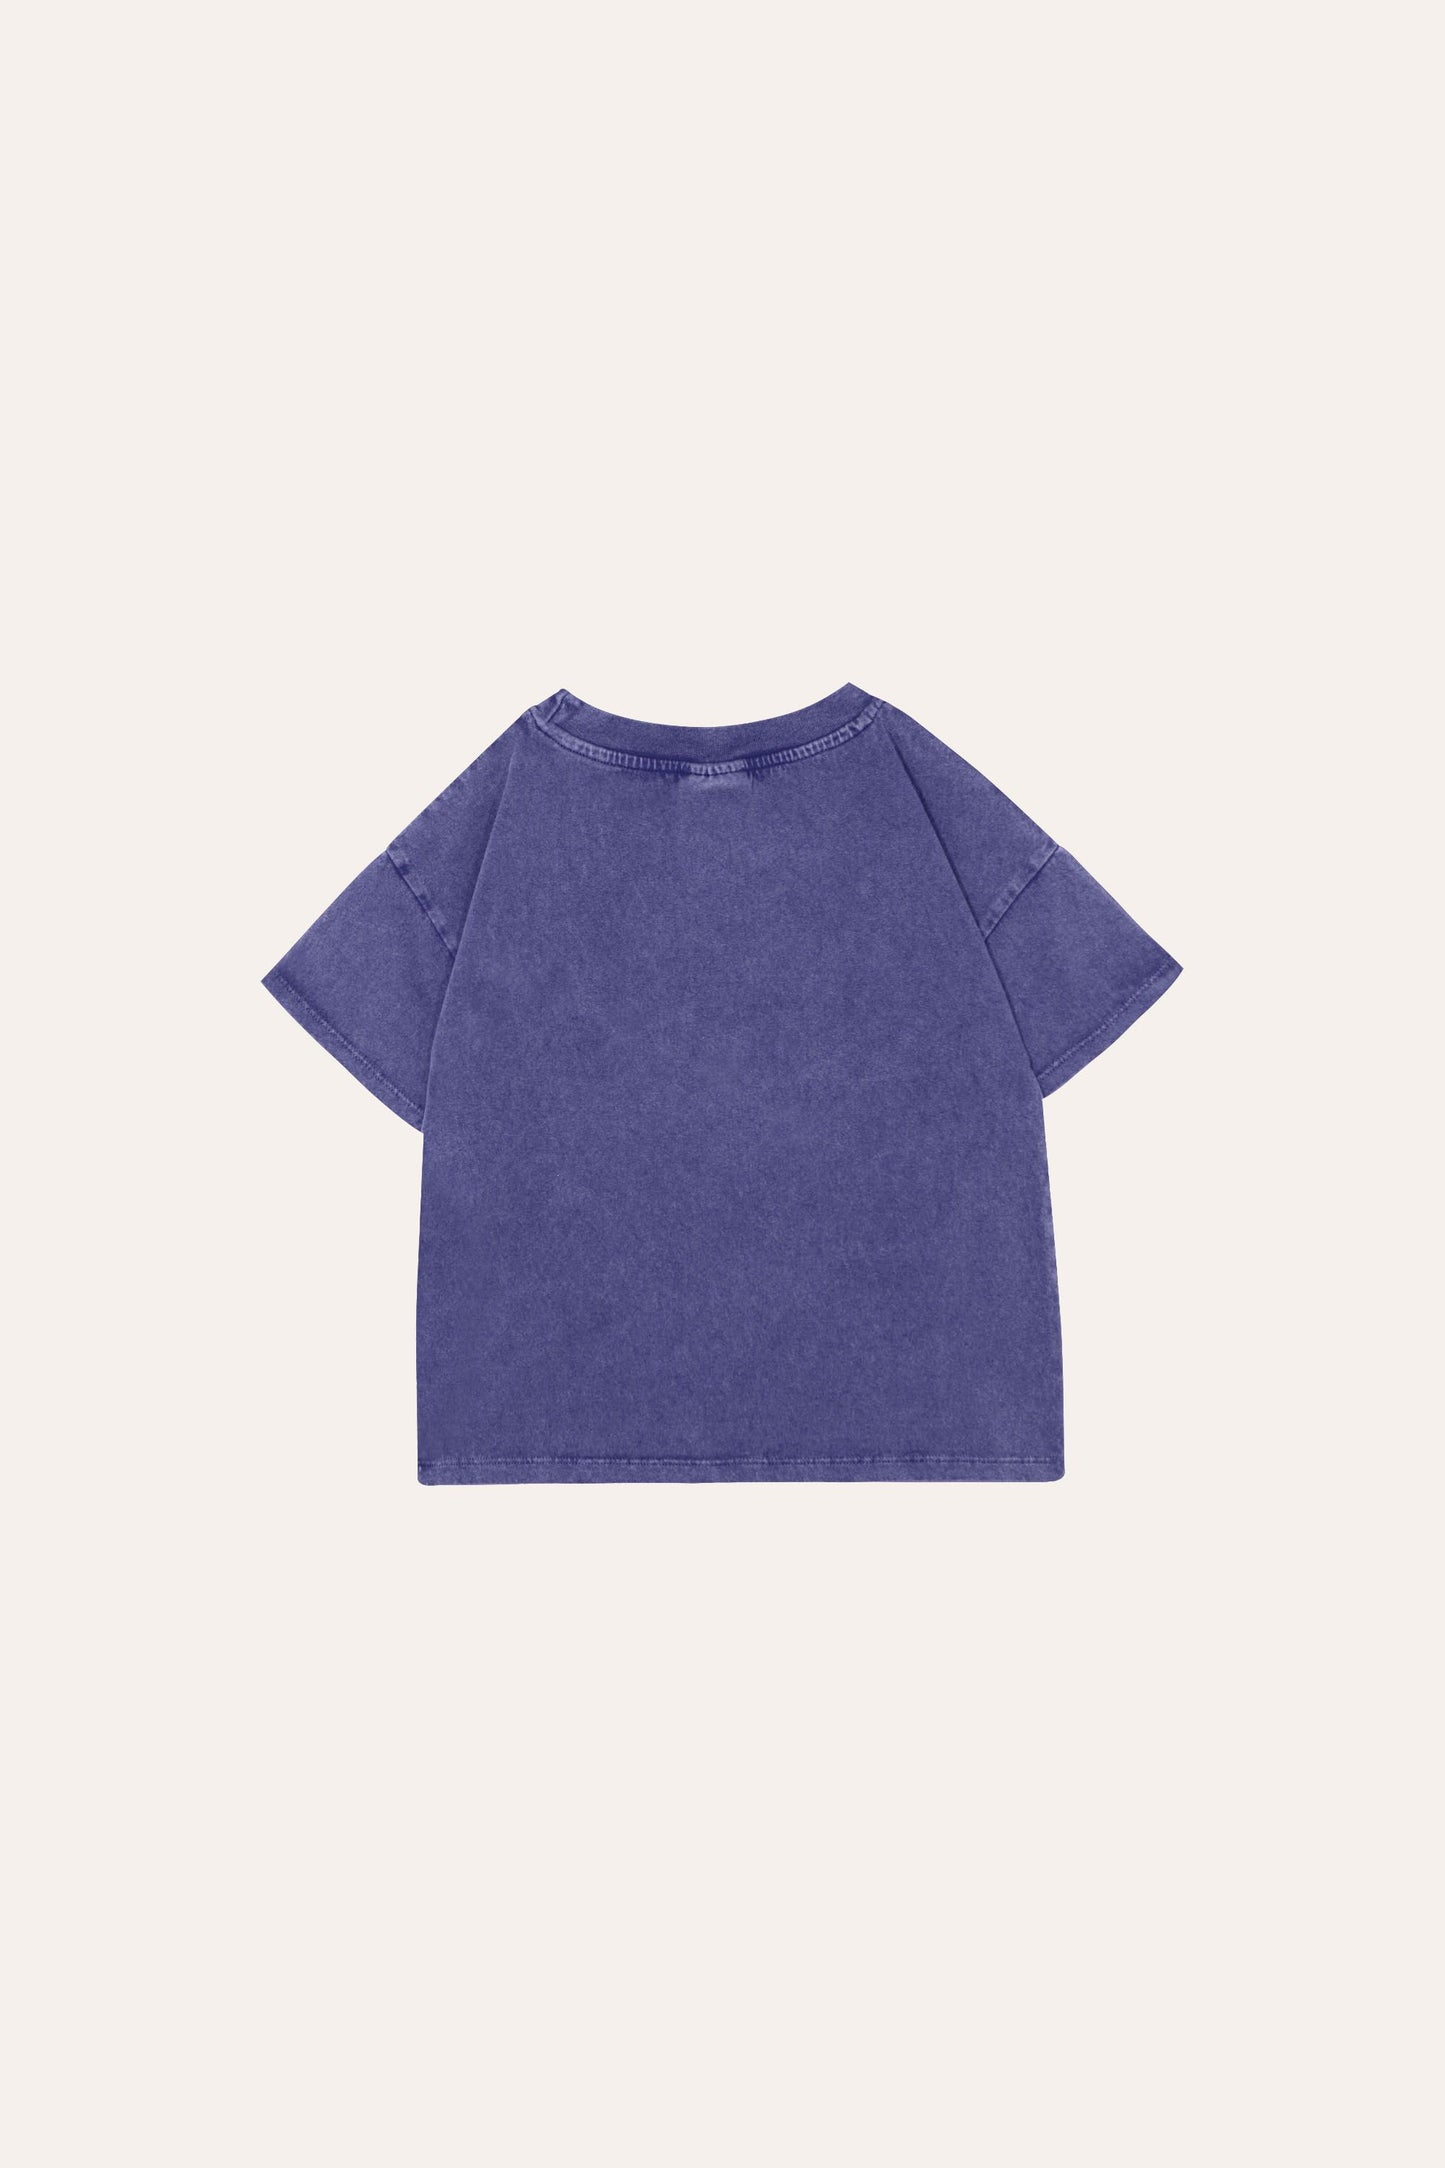 Dolphin Washed Tshirt - The Campamento